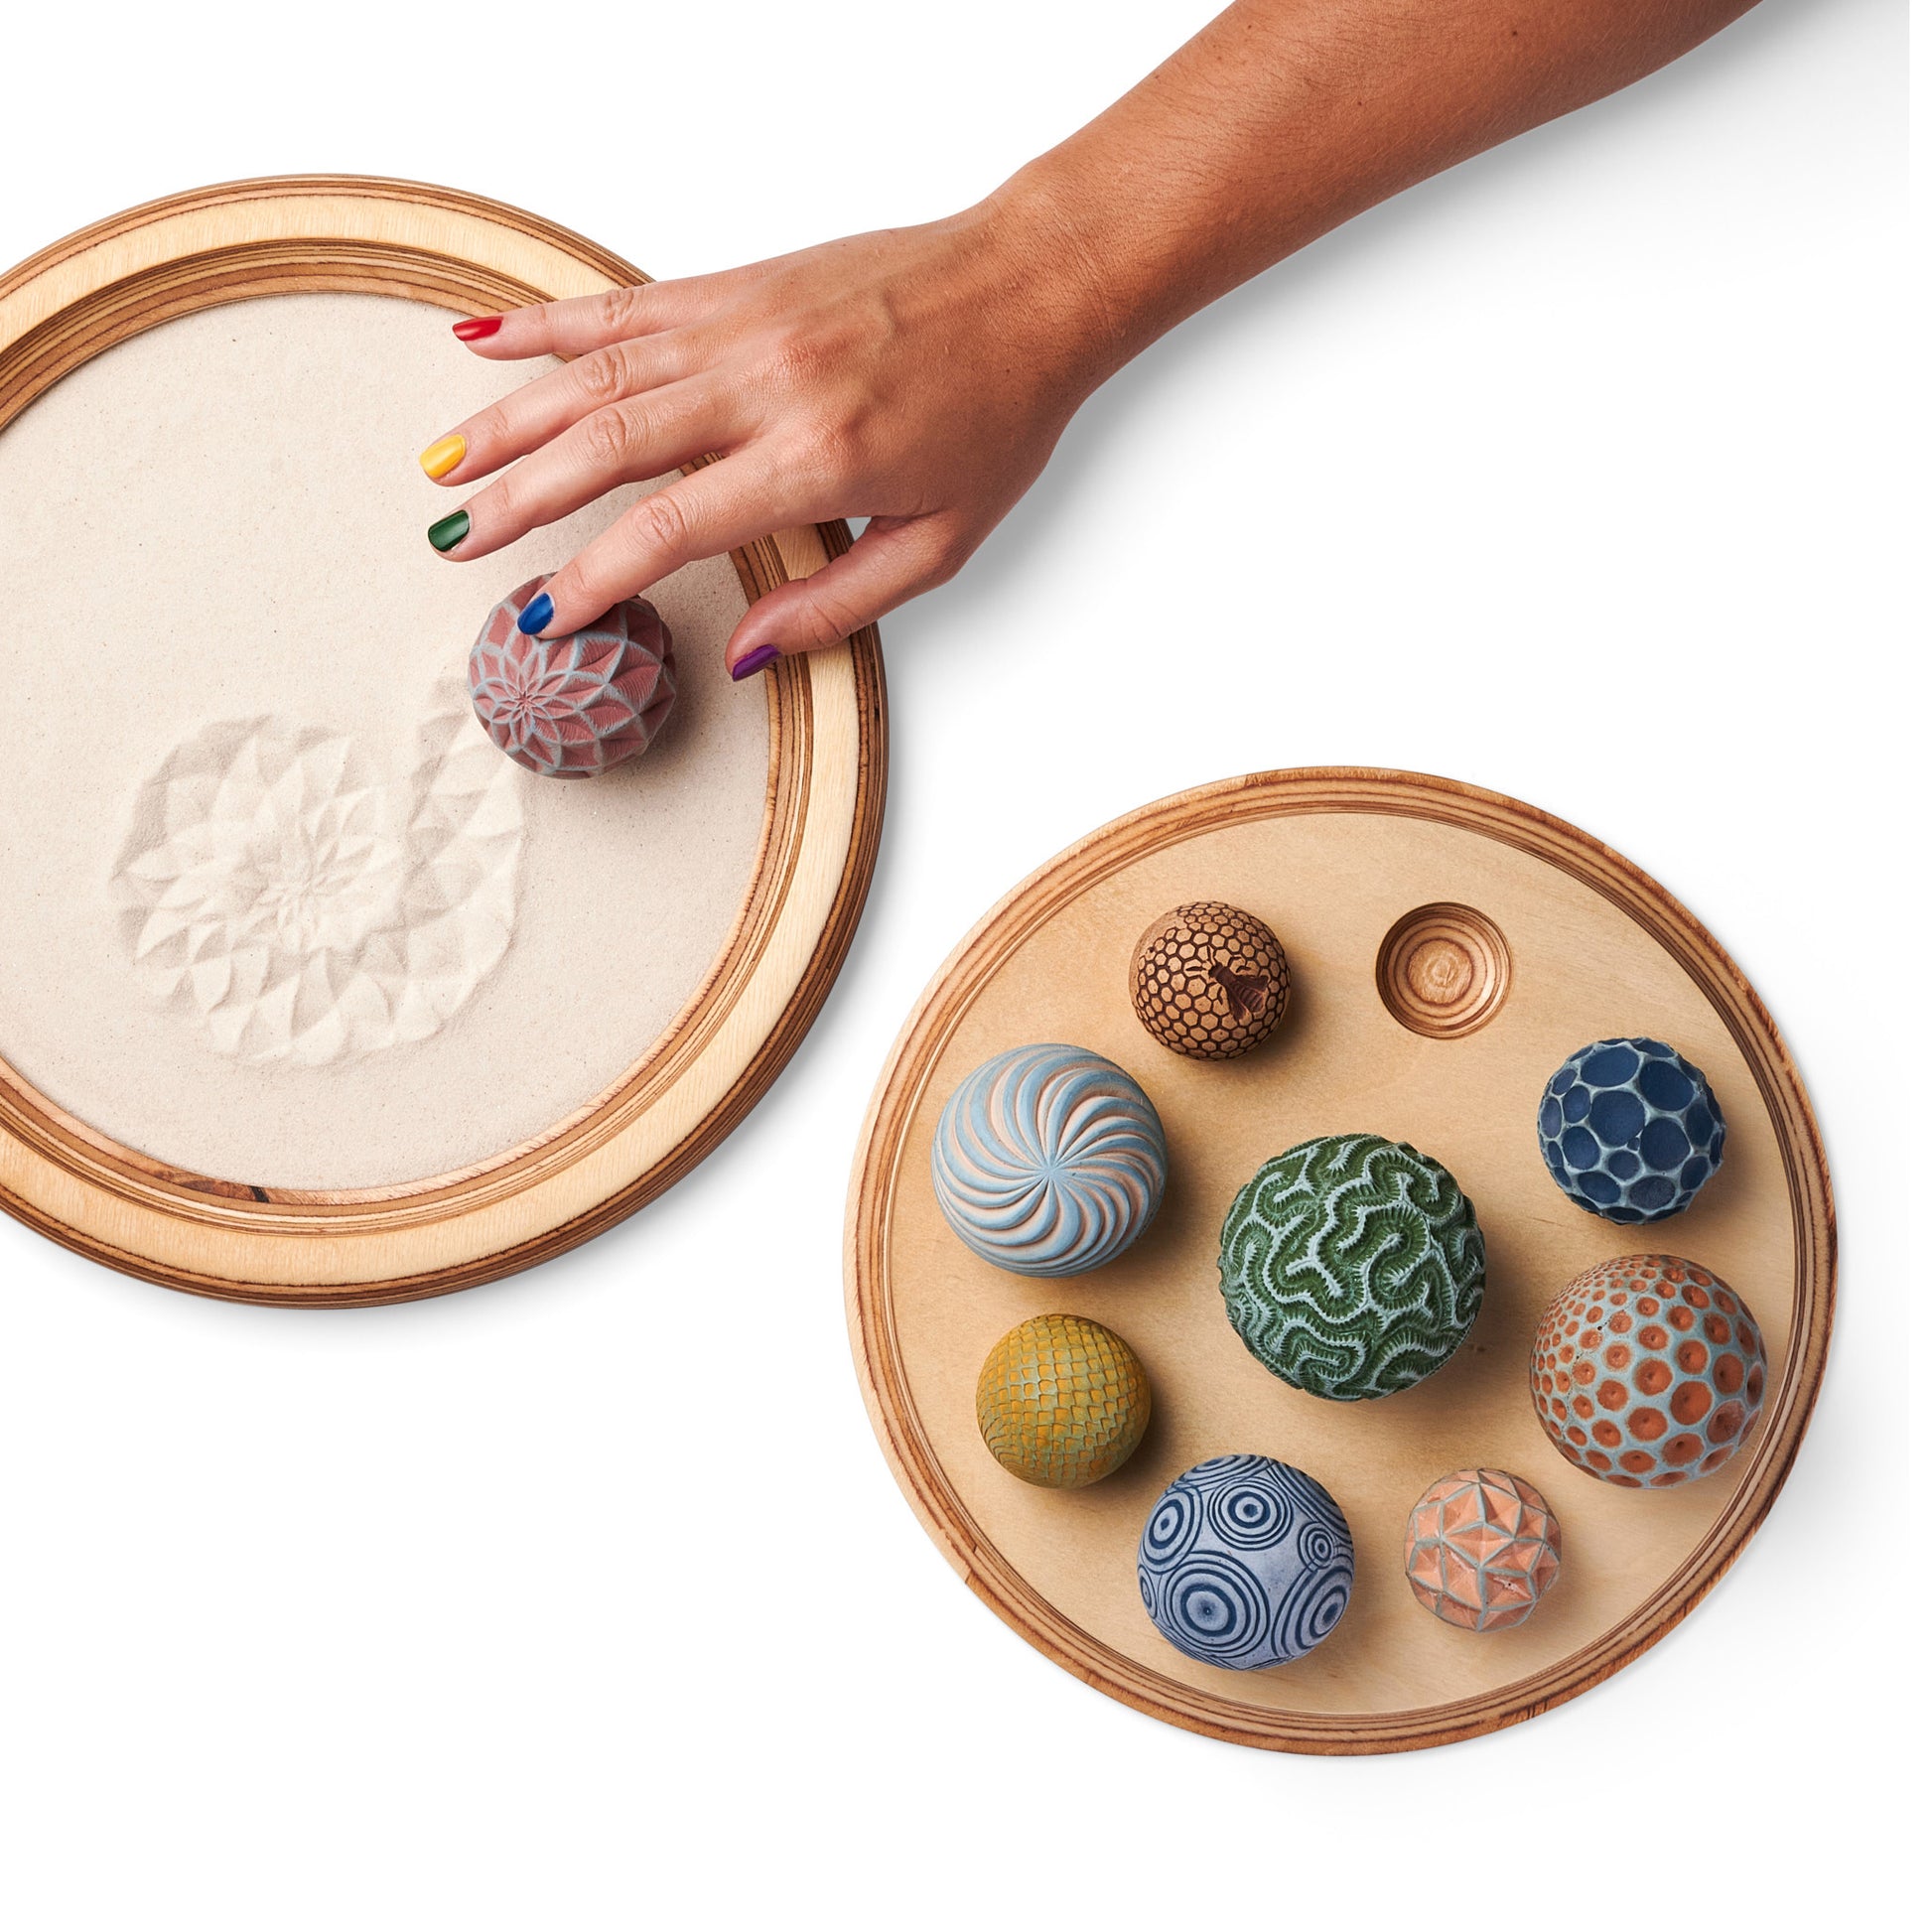 12 inch wonderscape cover in natural with sand spheres in play to demonstrate use